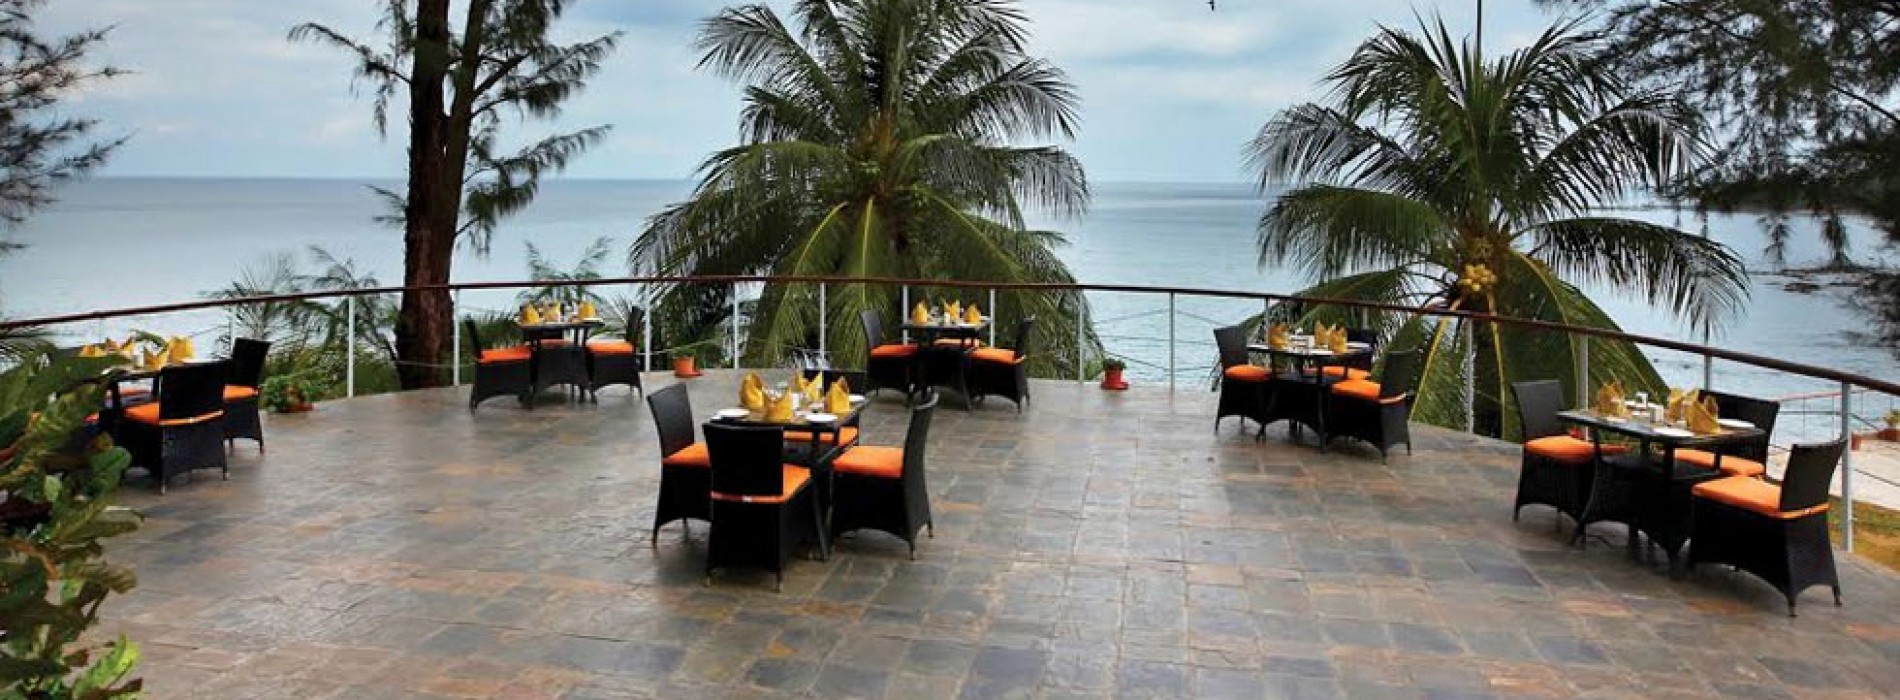 Sinclairs Bayview ranked No. 1 hotel in Port Blair by TripAdvisor